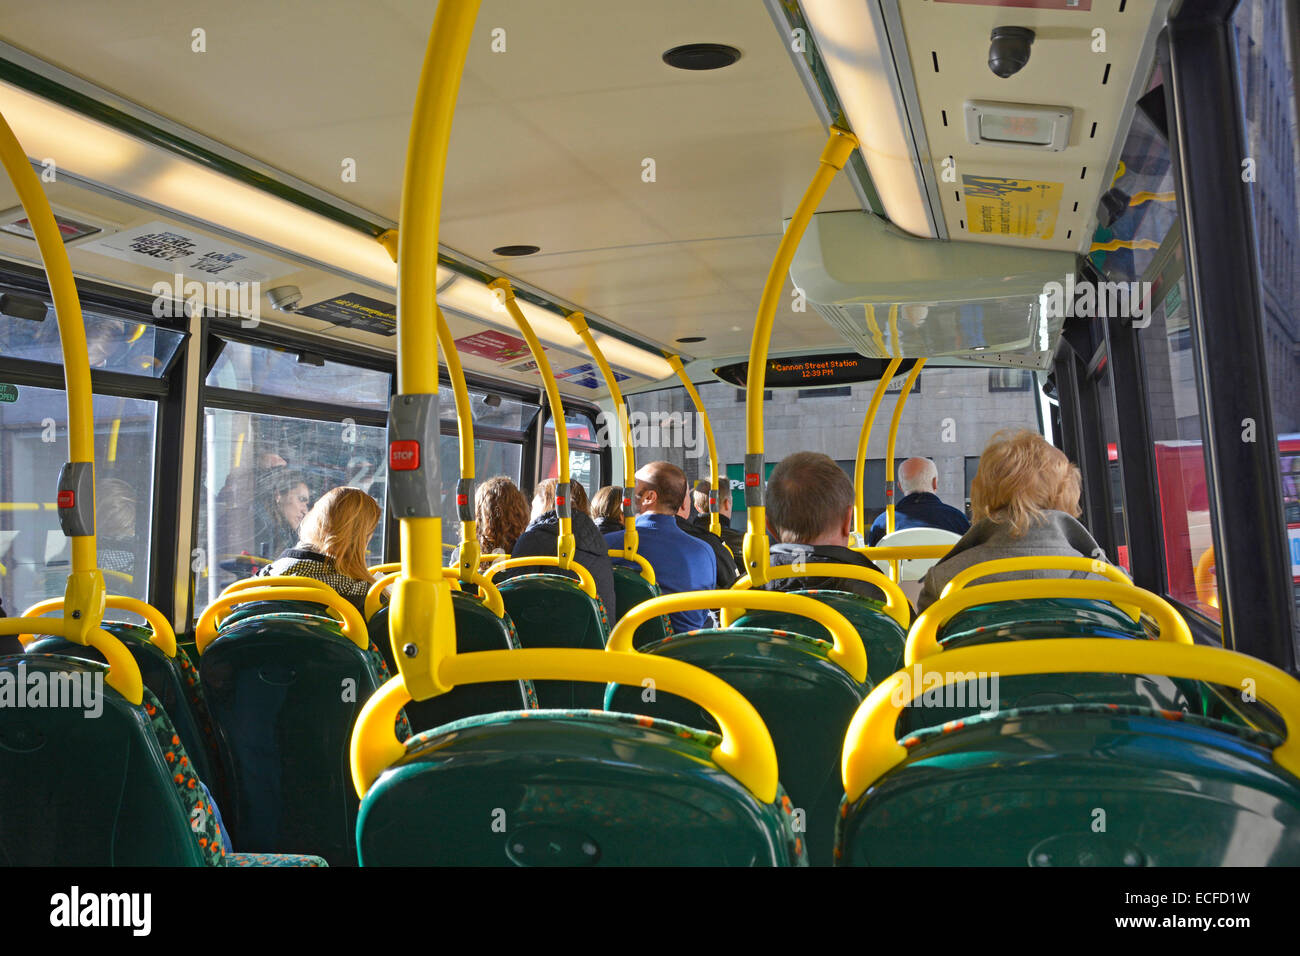 Interior back view of passengers seated on upper deck of London double decker bus England UK Stock Photo